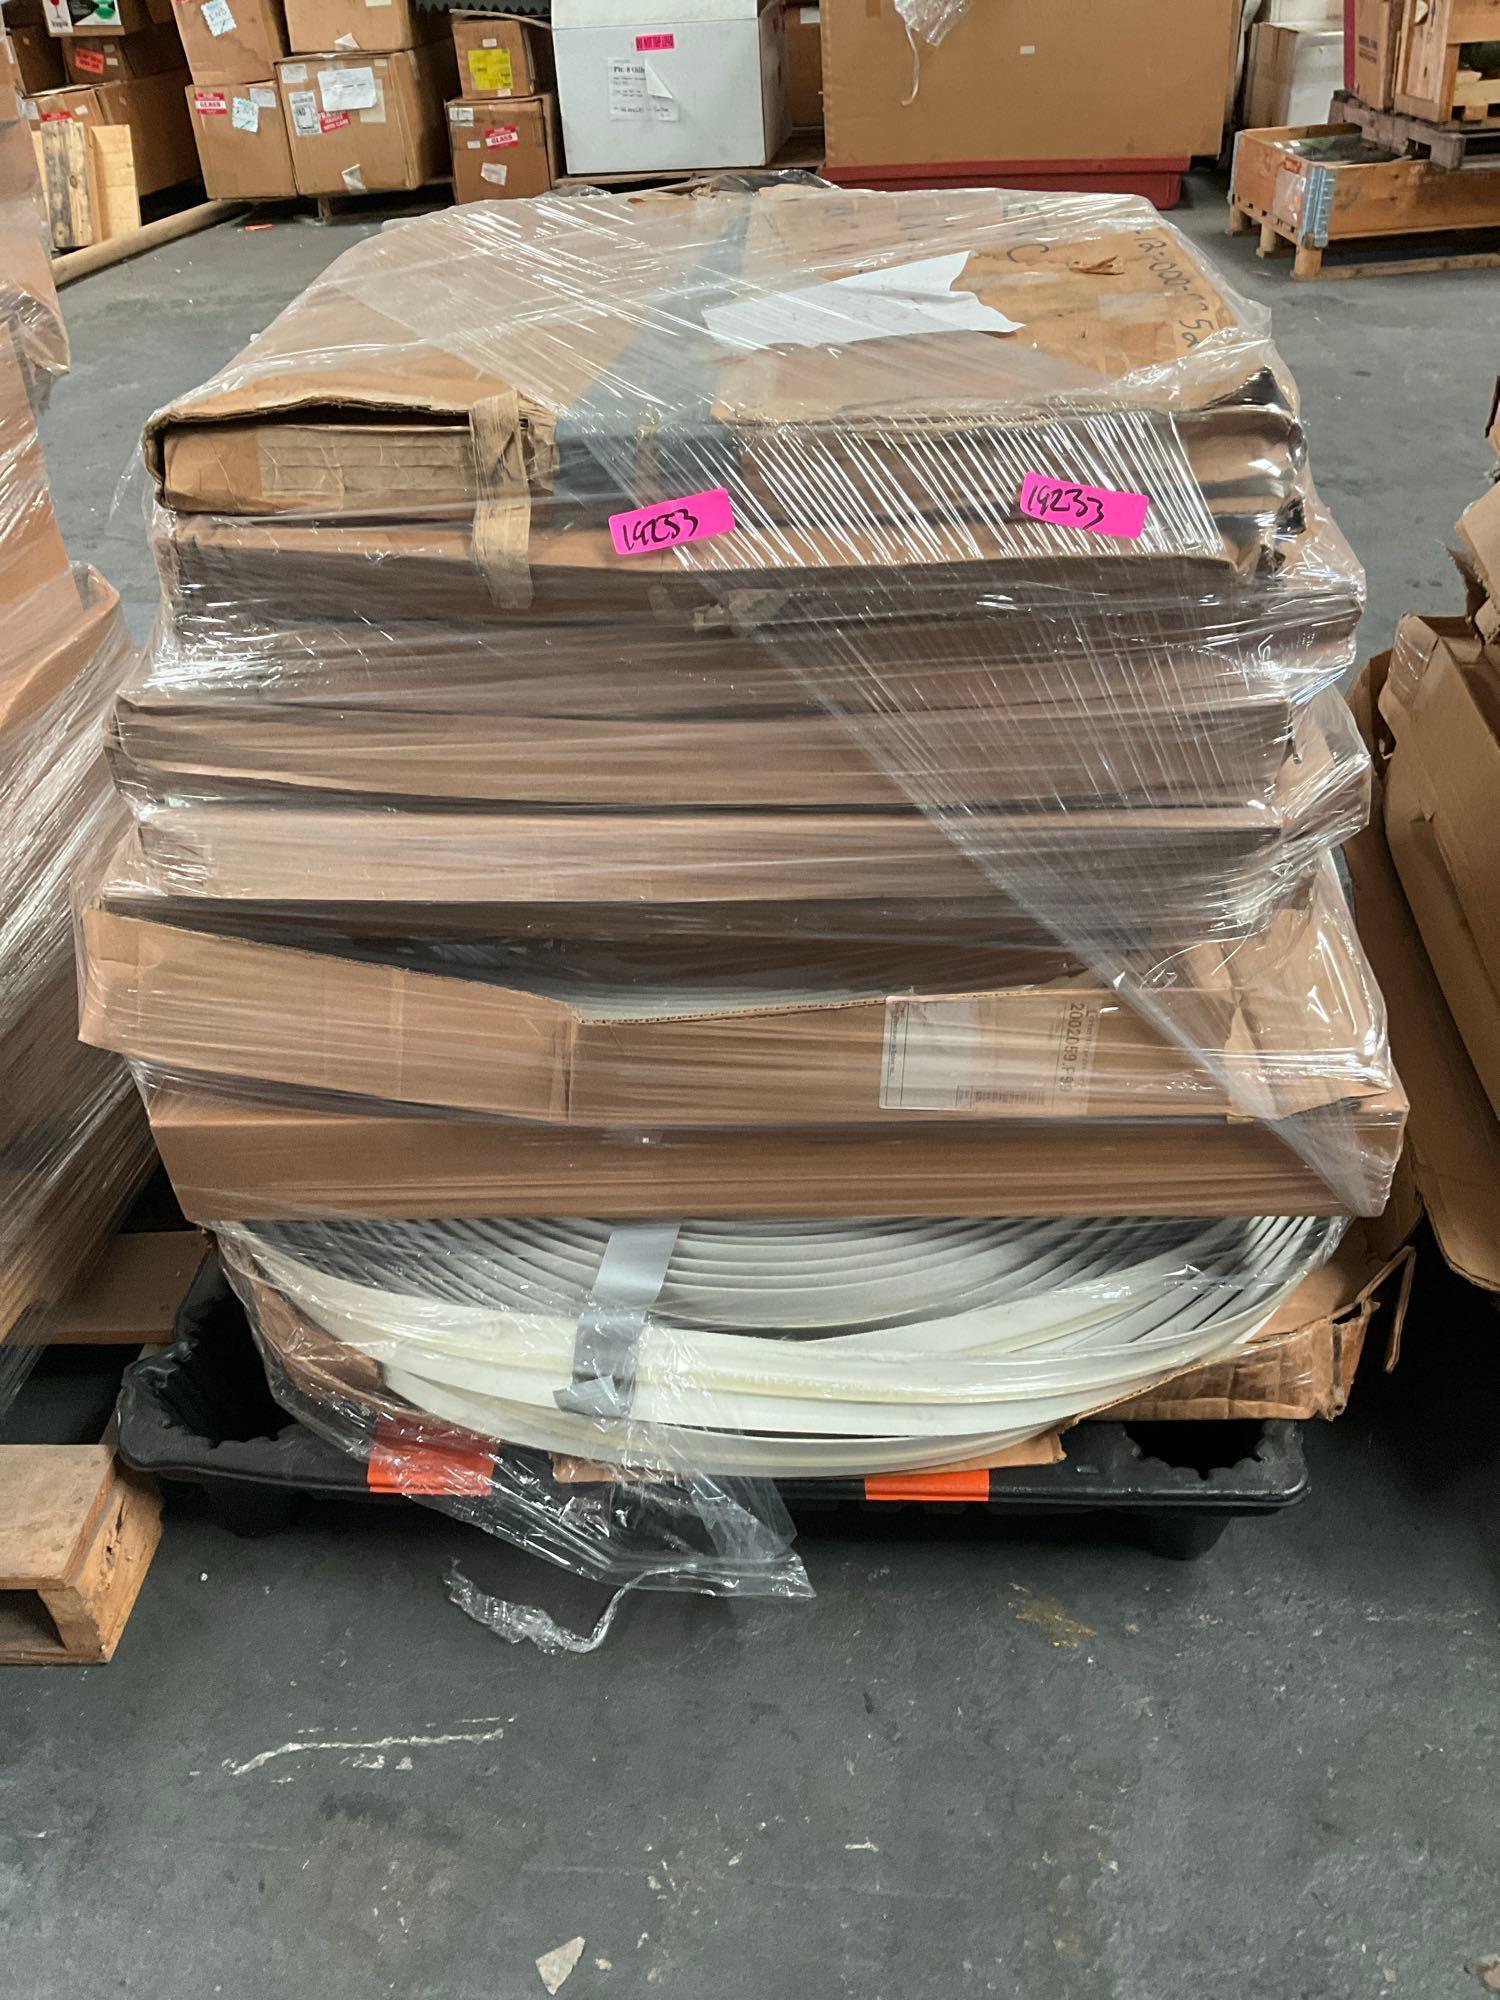 4 PALLETS OF...LOT OF CONVEYOR COVER ASSEMBLIES, SPROCKET REMOVAL PLATFORMS, DRIVE BELTS, AND MORE